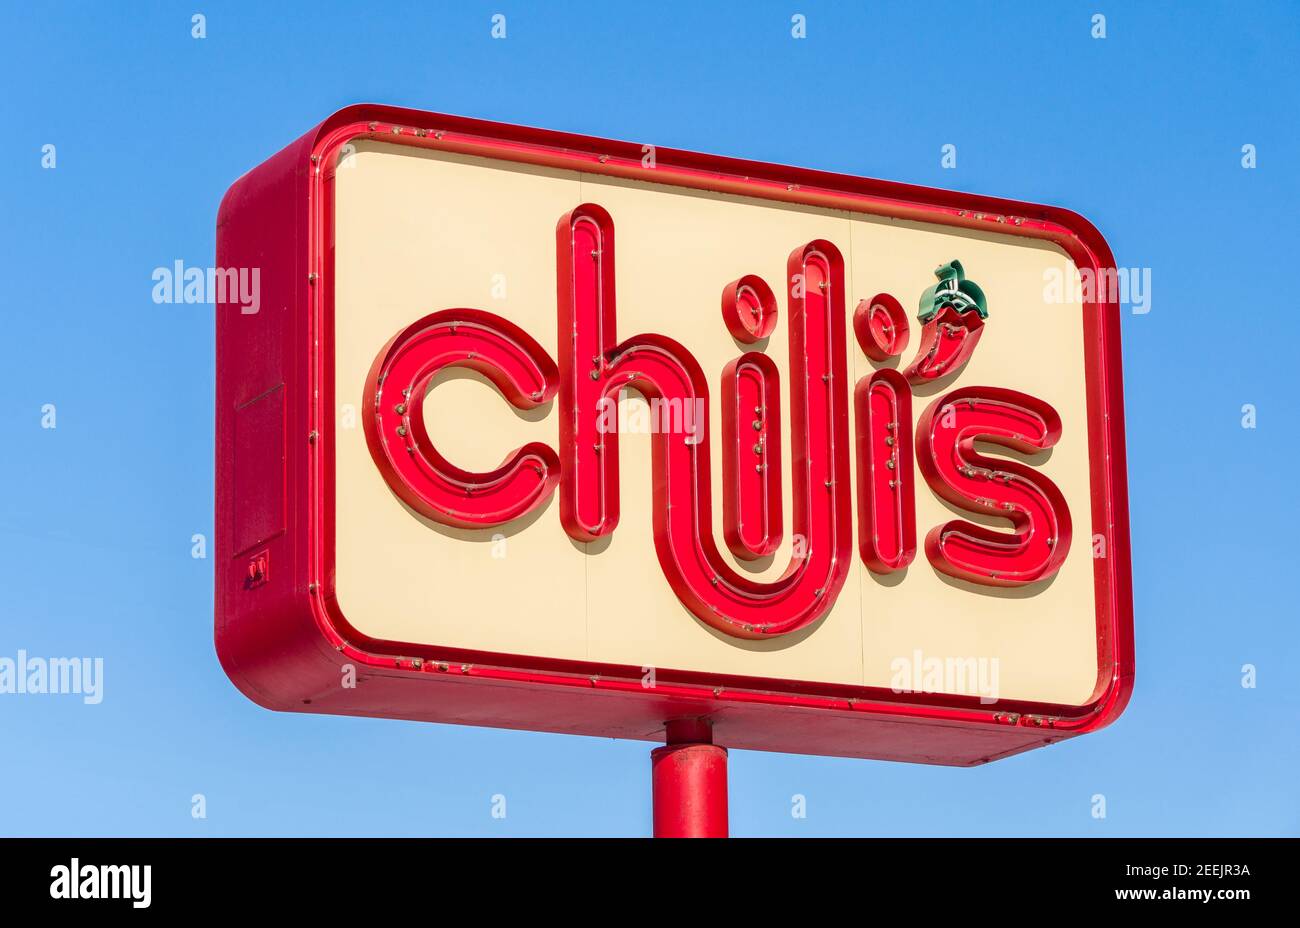 MINNEAPOLIS, MN/USA - JANUARY 14, 2017: Chili's restaurant exterior sign. Chili's Grill & Bar is an American casual dining restaurant chain that featu Stock Photo